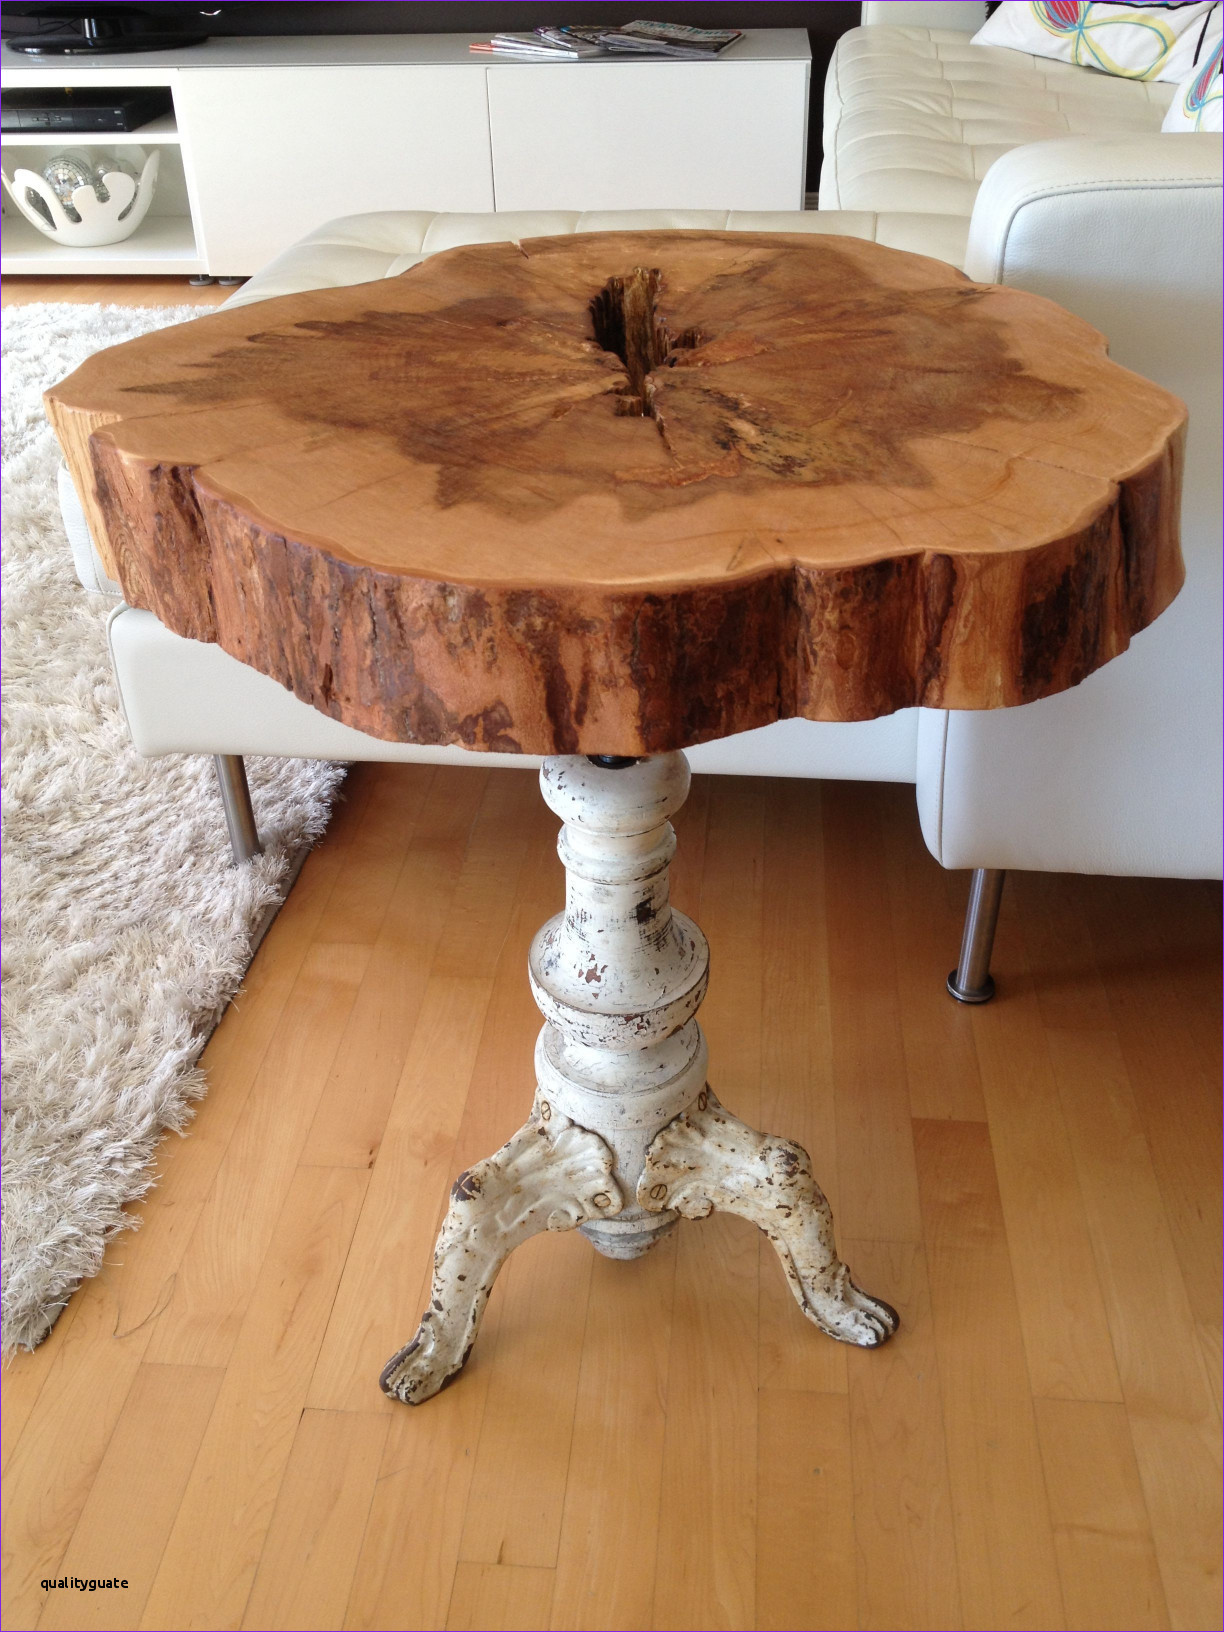 staining hardwood floors how to of tables fancy tree trunk table fresh tree trunk table lamp best wood in tables fancy tree trunk table fresh tree trunk table lamp best wood tables 0d